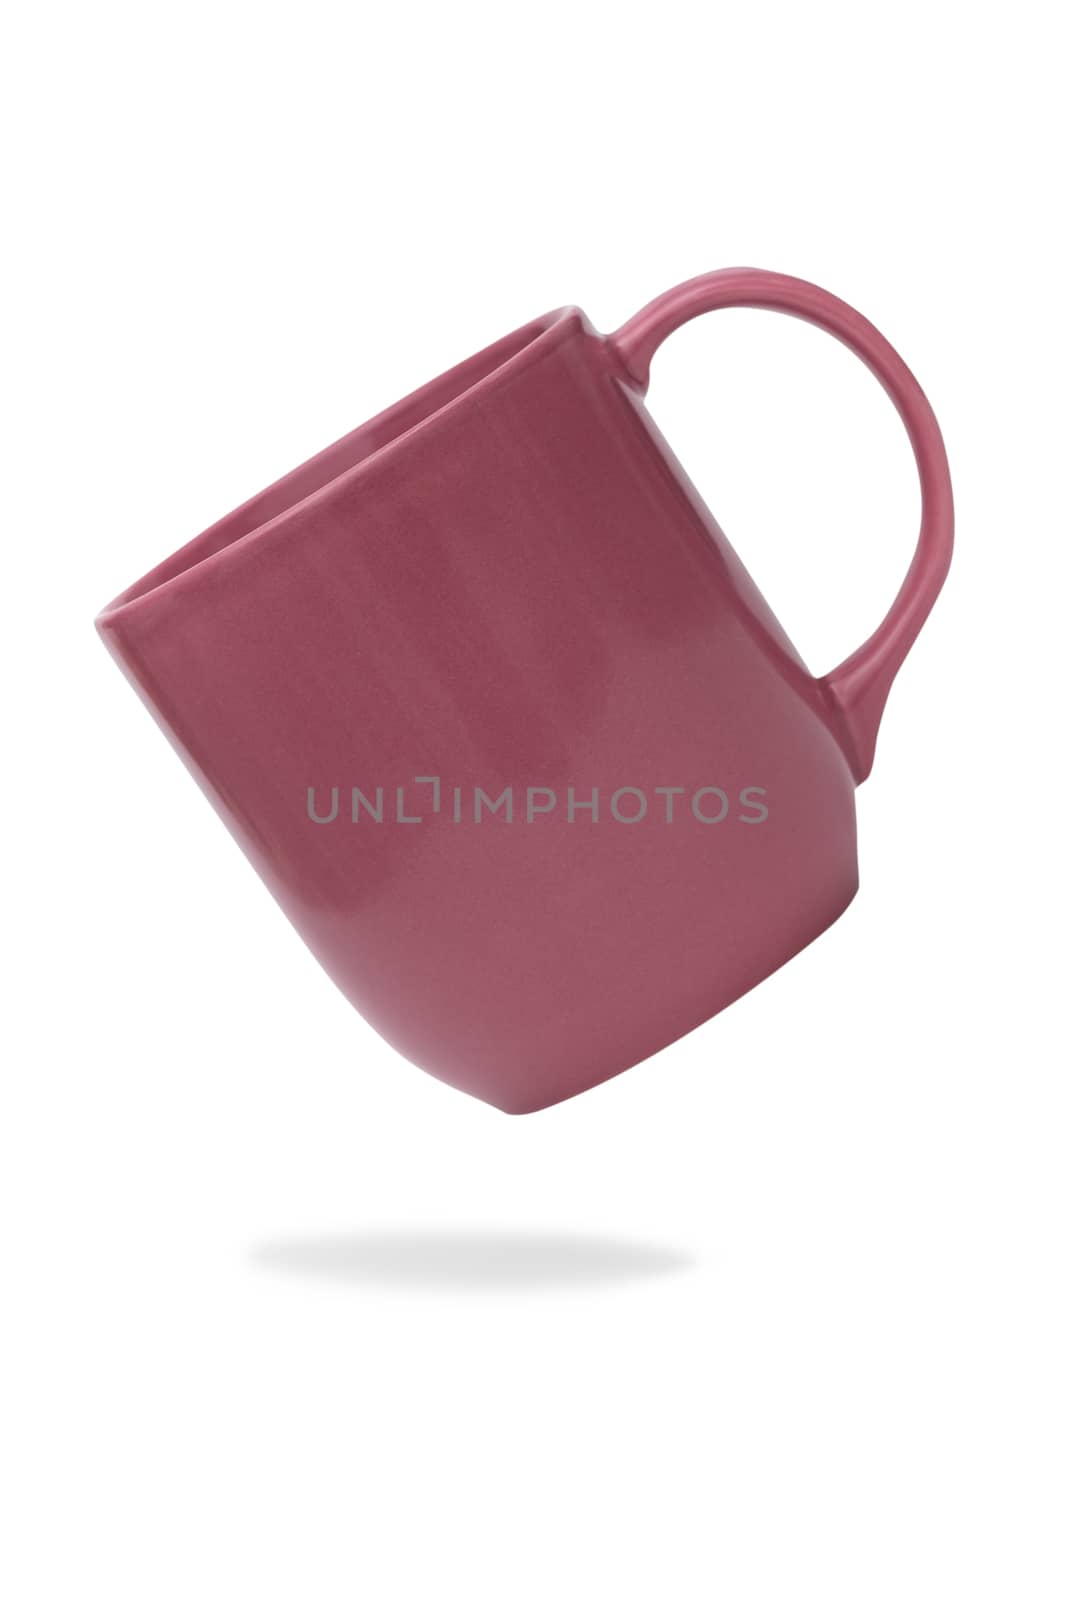 Pink ceramic mug or Coffee cup with shadow isolated on white background.